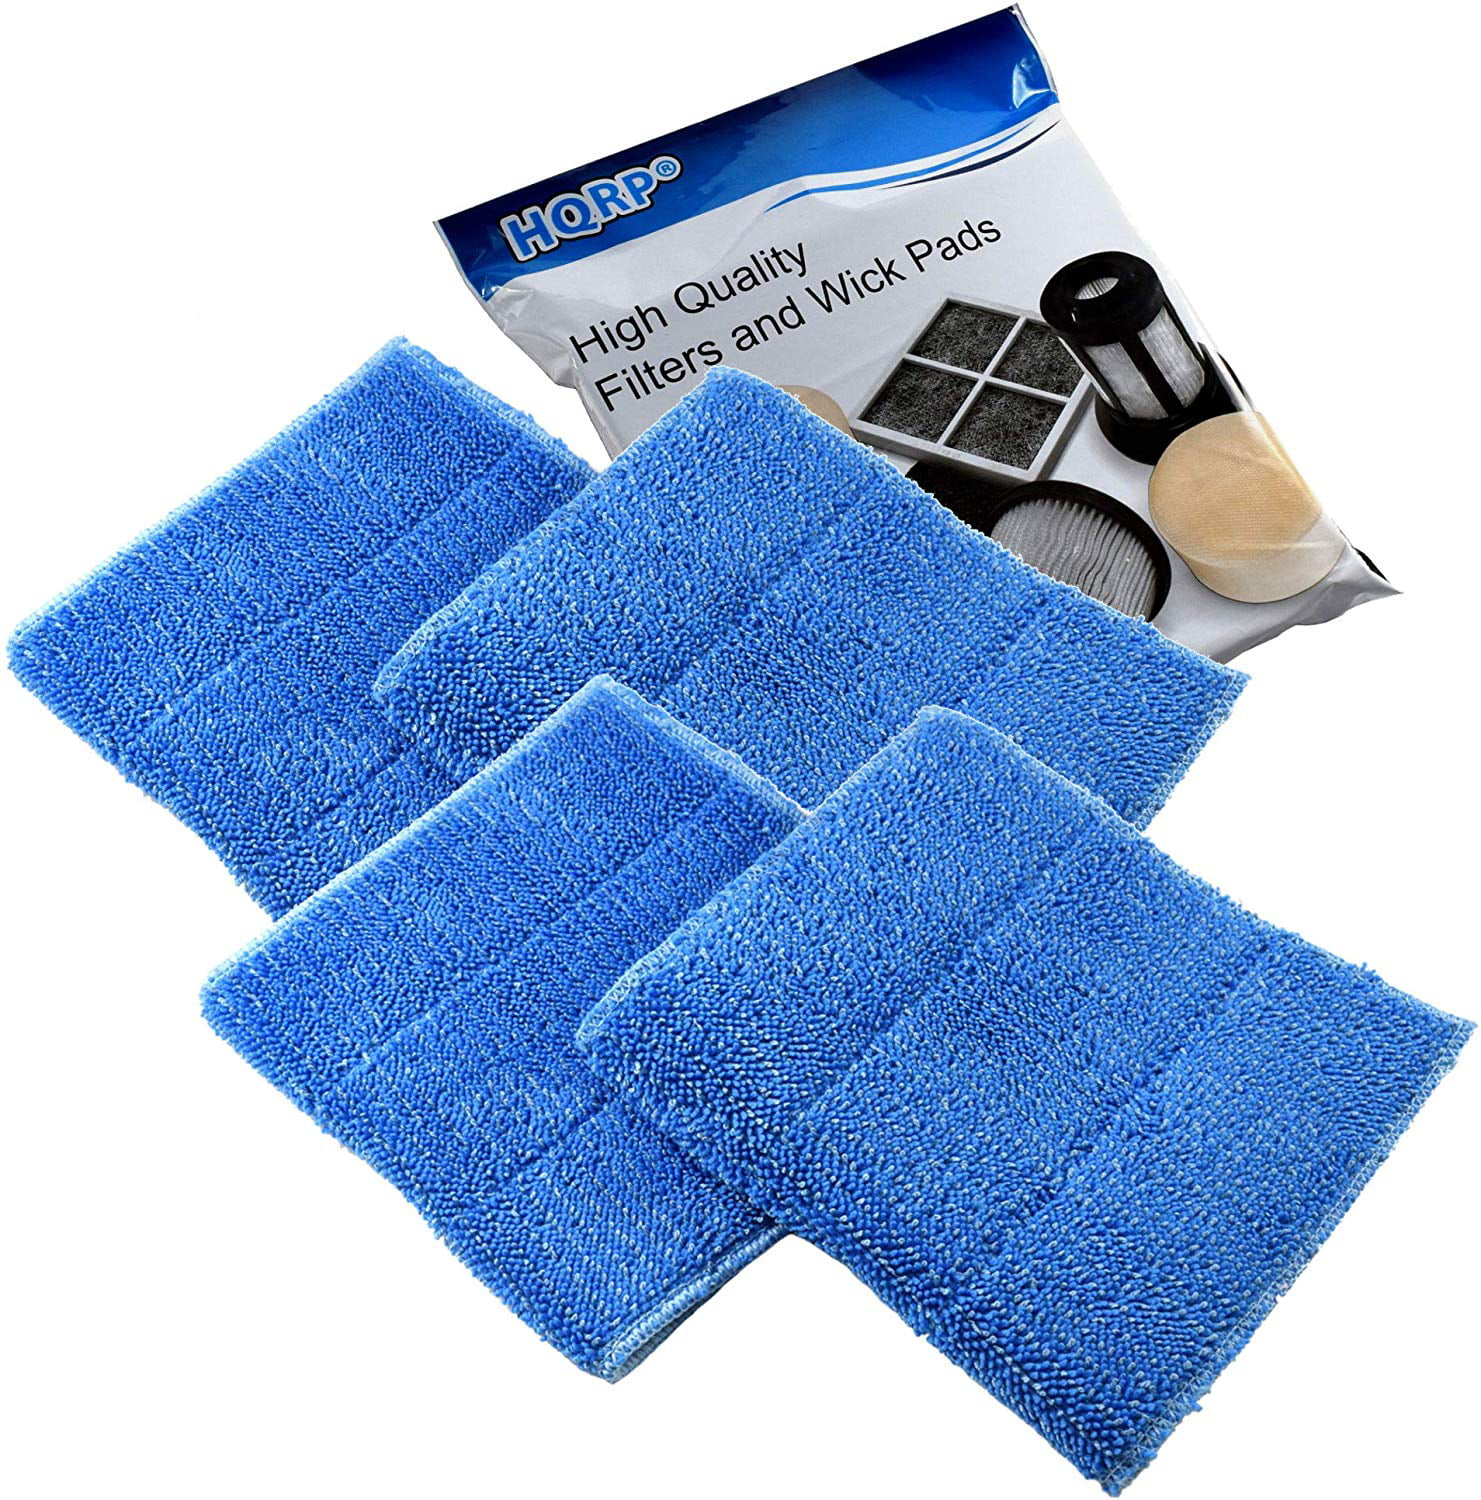 For HAAN Steam Cleaner Mop Accessories RMF-4X Ultra-Clean Pads Cleaning Tool Set 